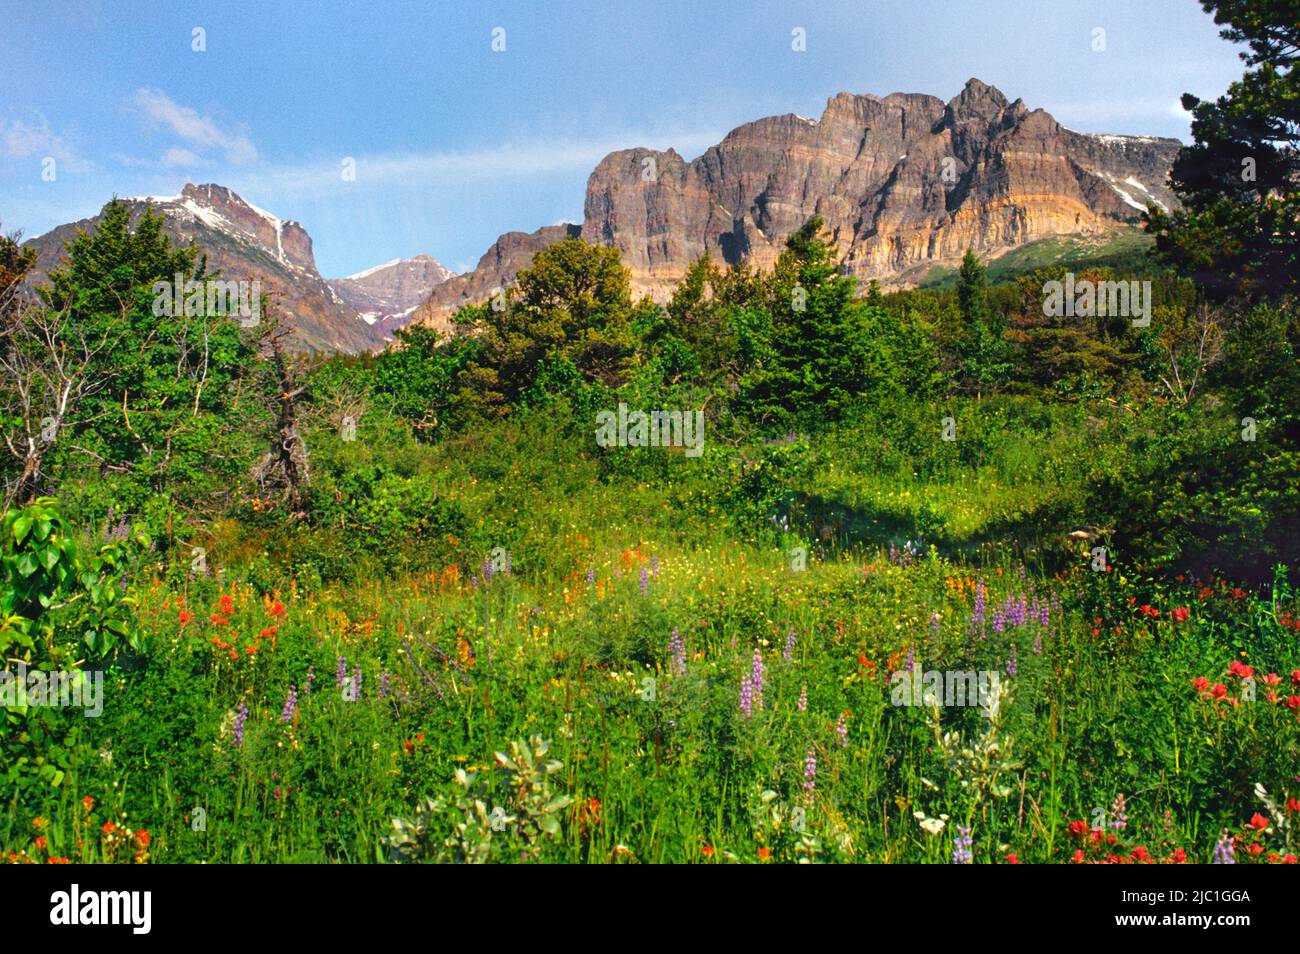 Glacier National Park Montana Many Glacier Valley, Rocky Mountains. Alpine field of wildflowers and glaciers. Scenic landscape of American West, USA Stock Photo